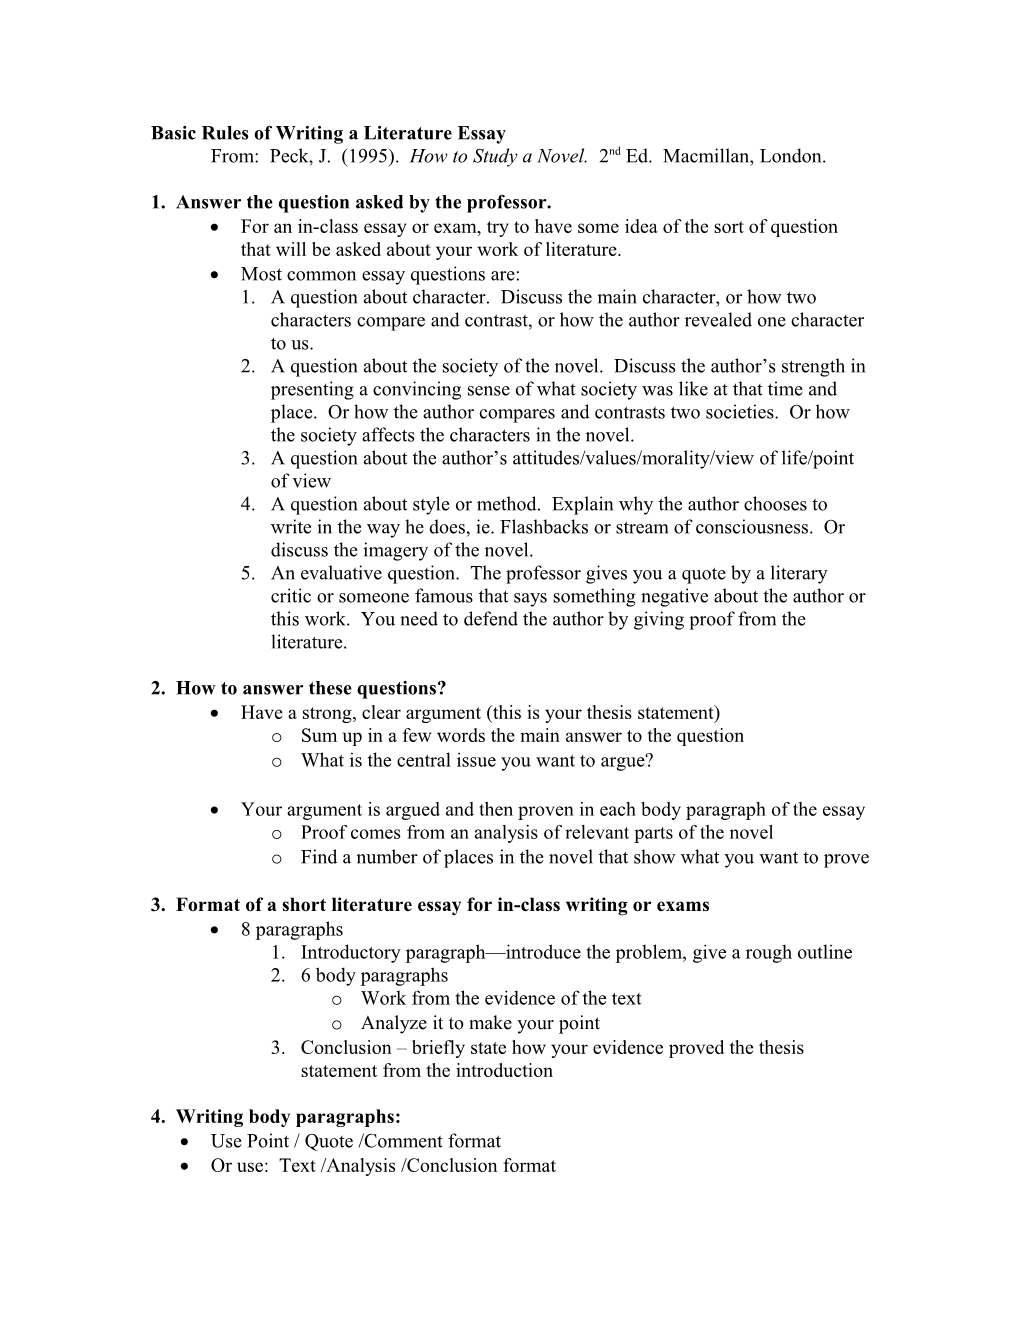 Basic Rules of Writing a Literature Essay